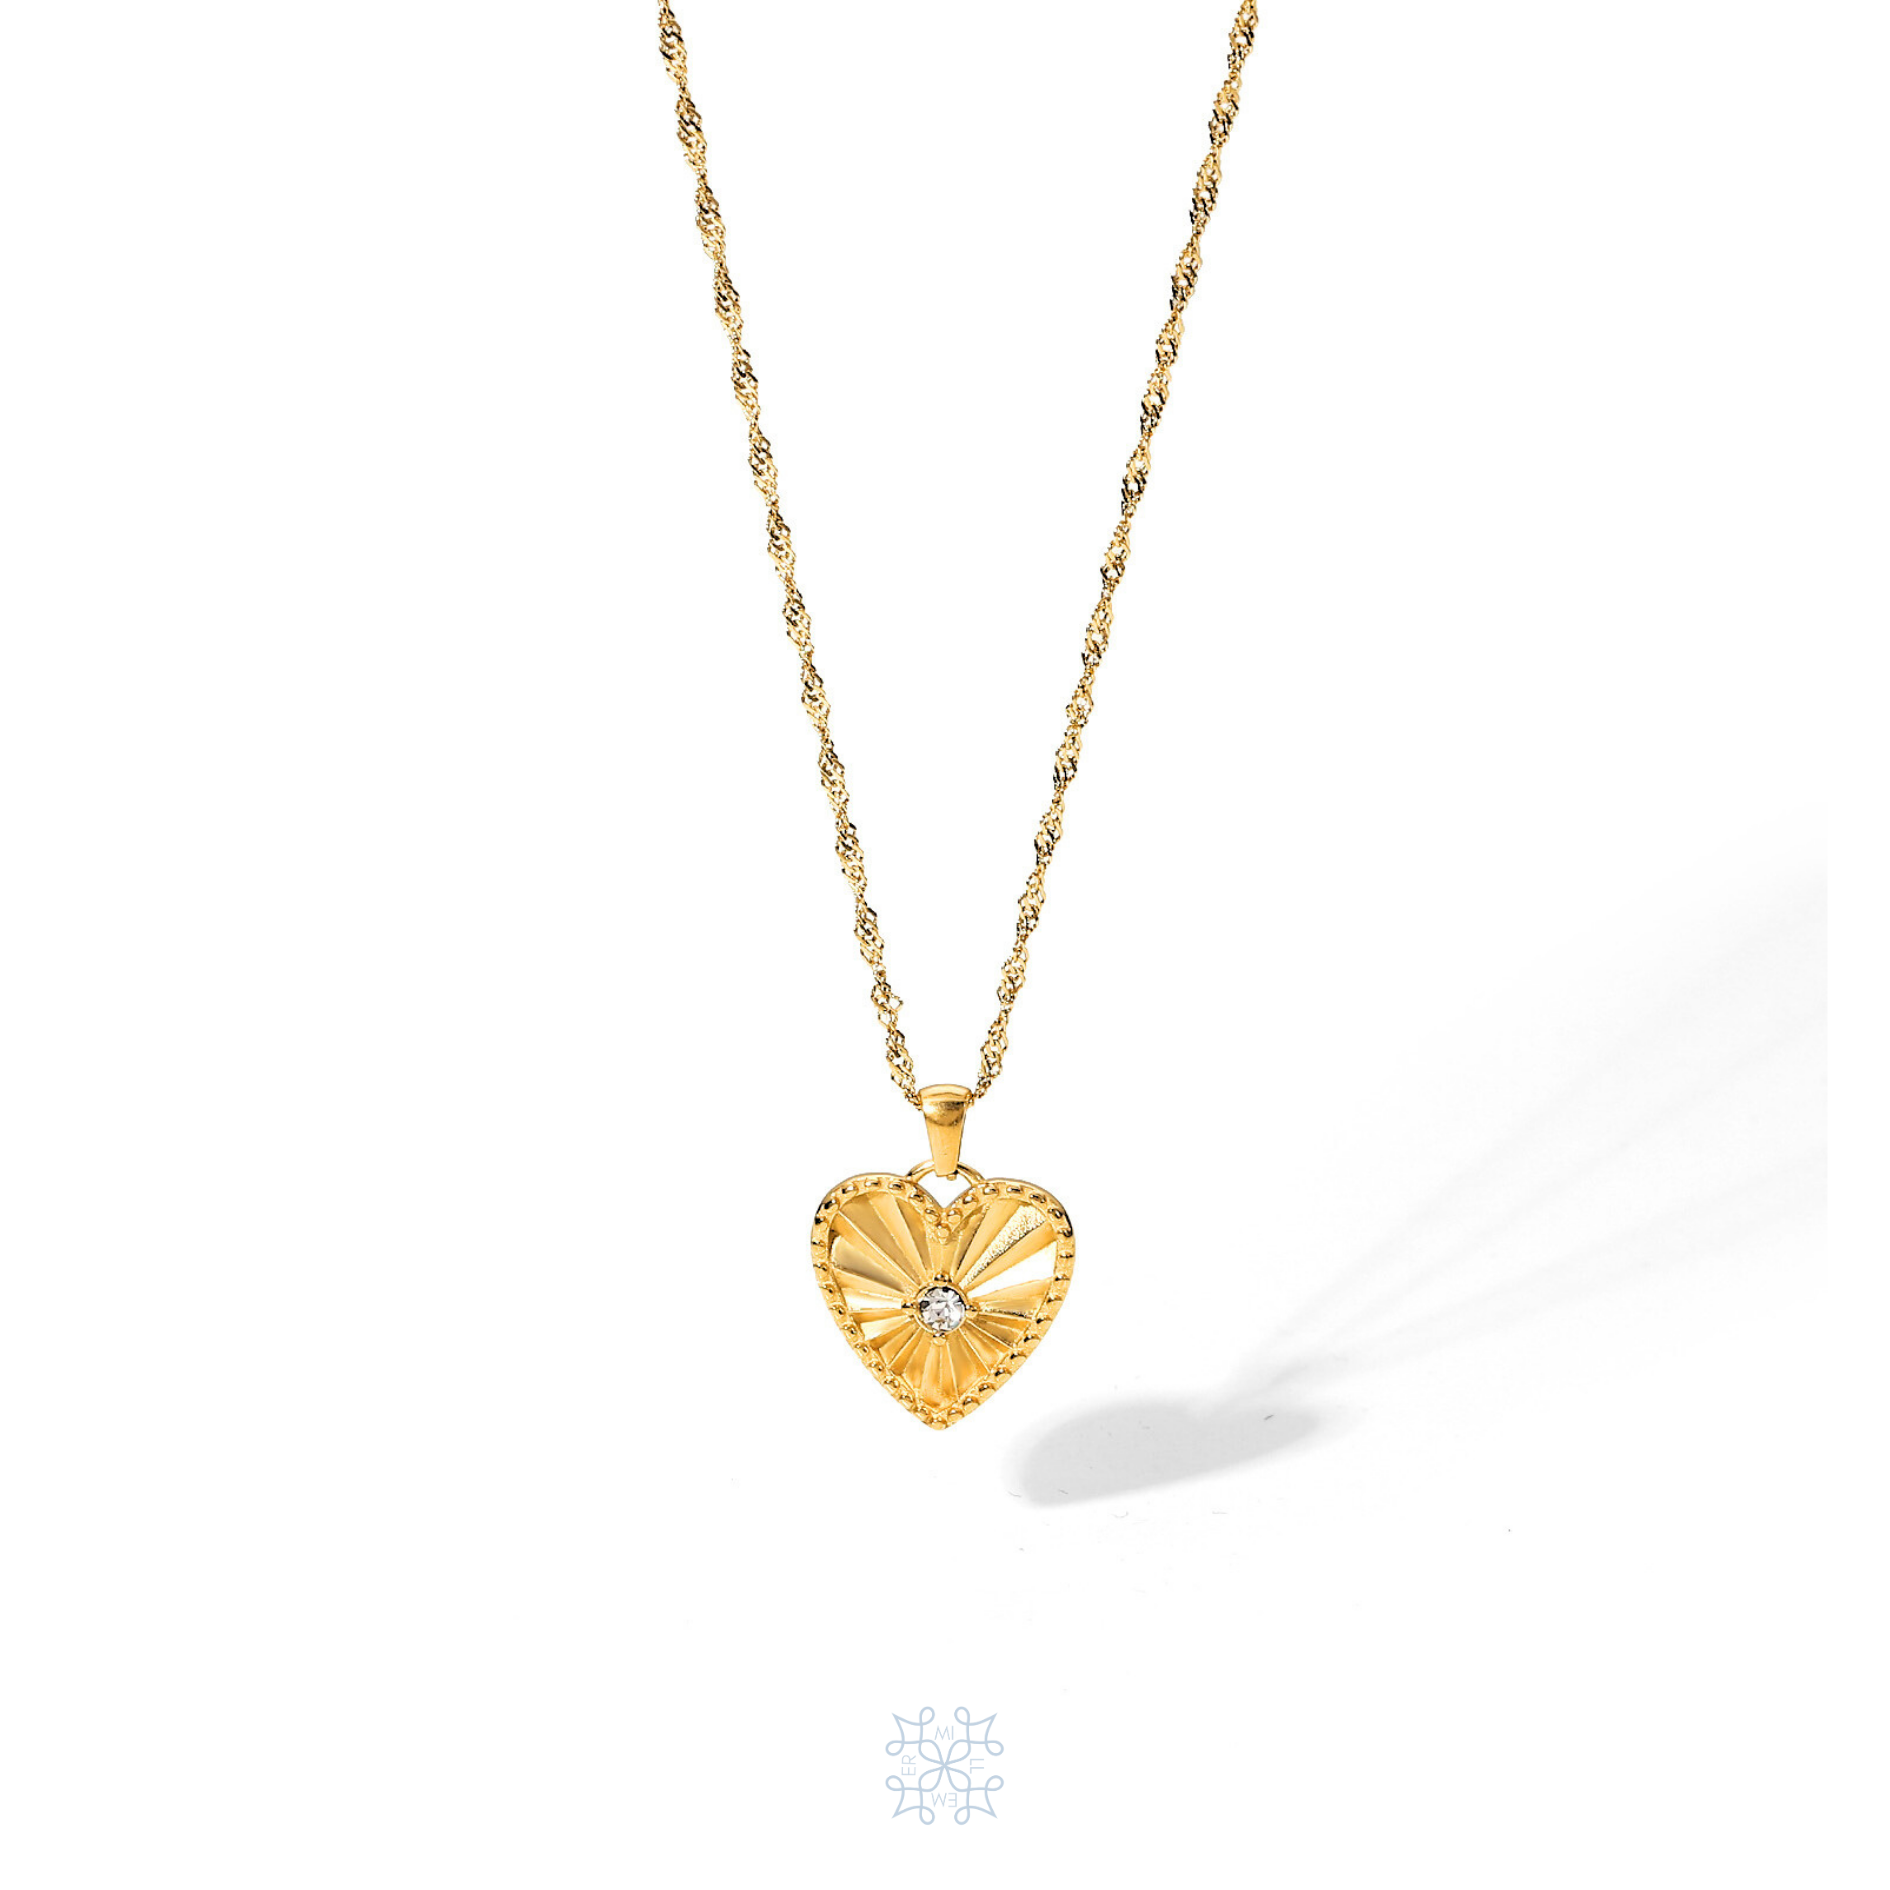 Gold plated chain necklace with a heart pendant droping on the chain. A zircon stone in the middle of the heart. The heart has engraved rays pattern starting from the middle opening the borders of the gold heart. Heart Pendant gold necklace.